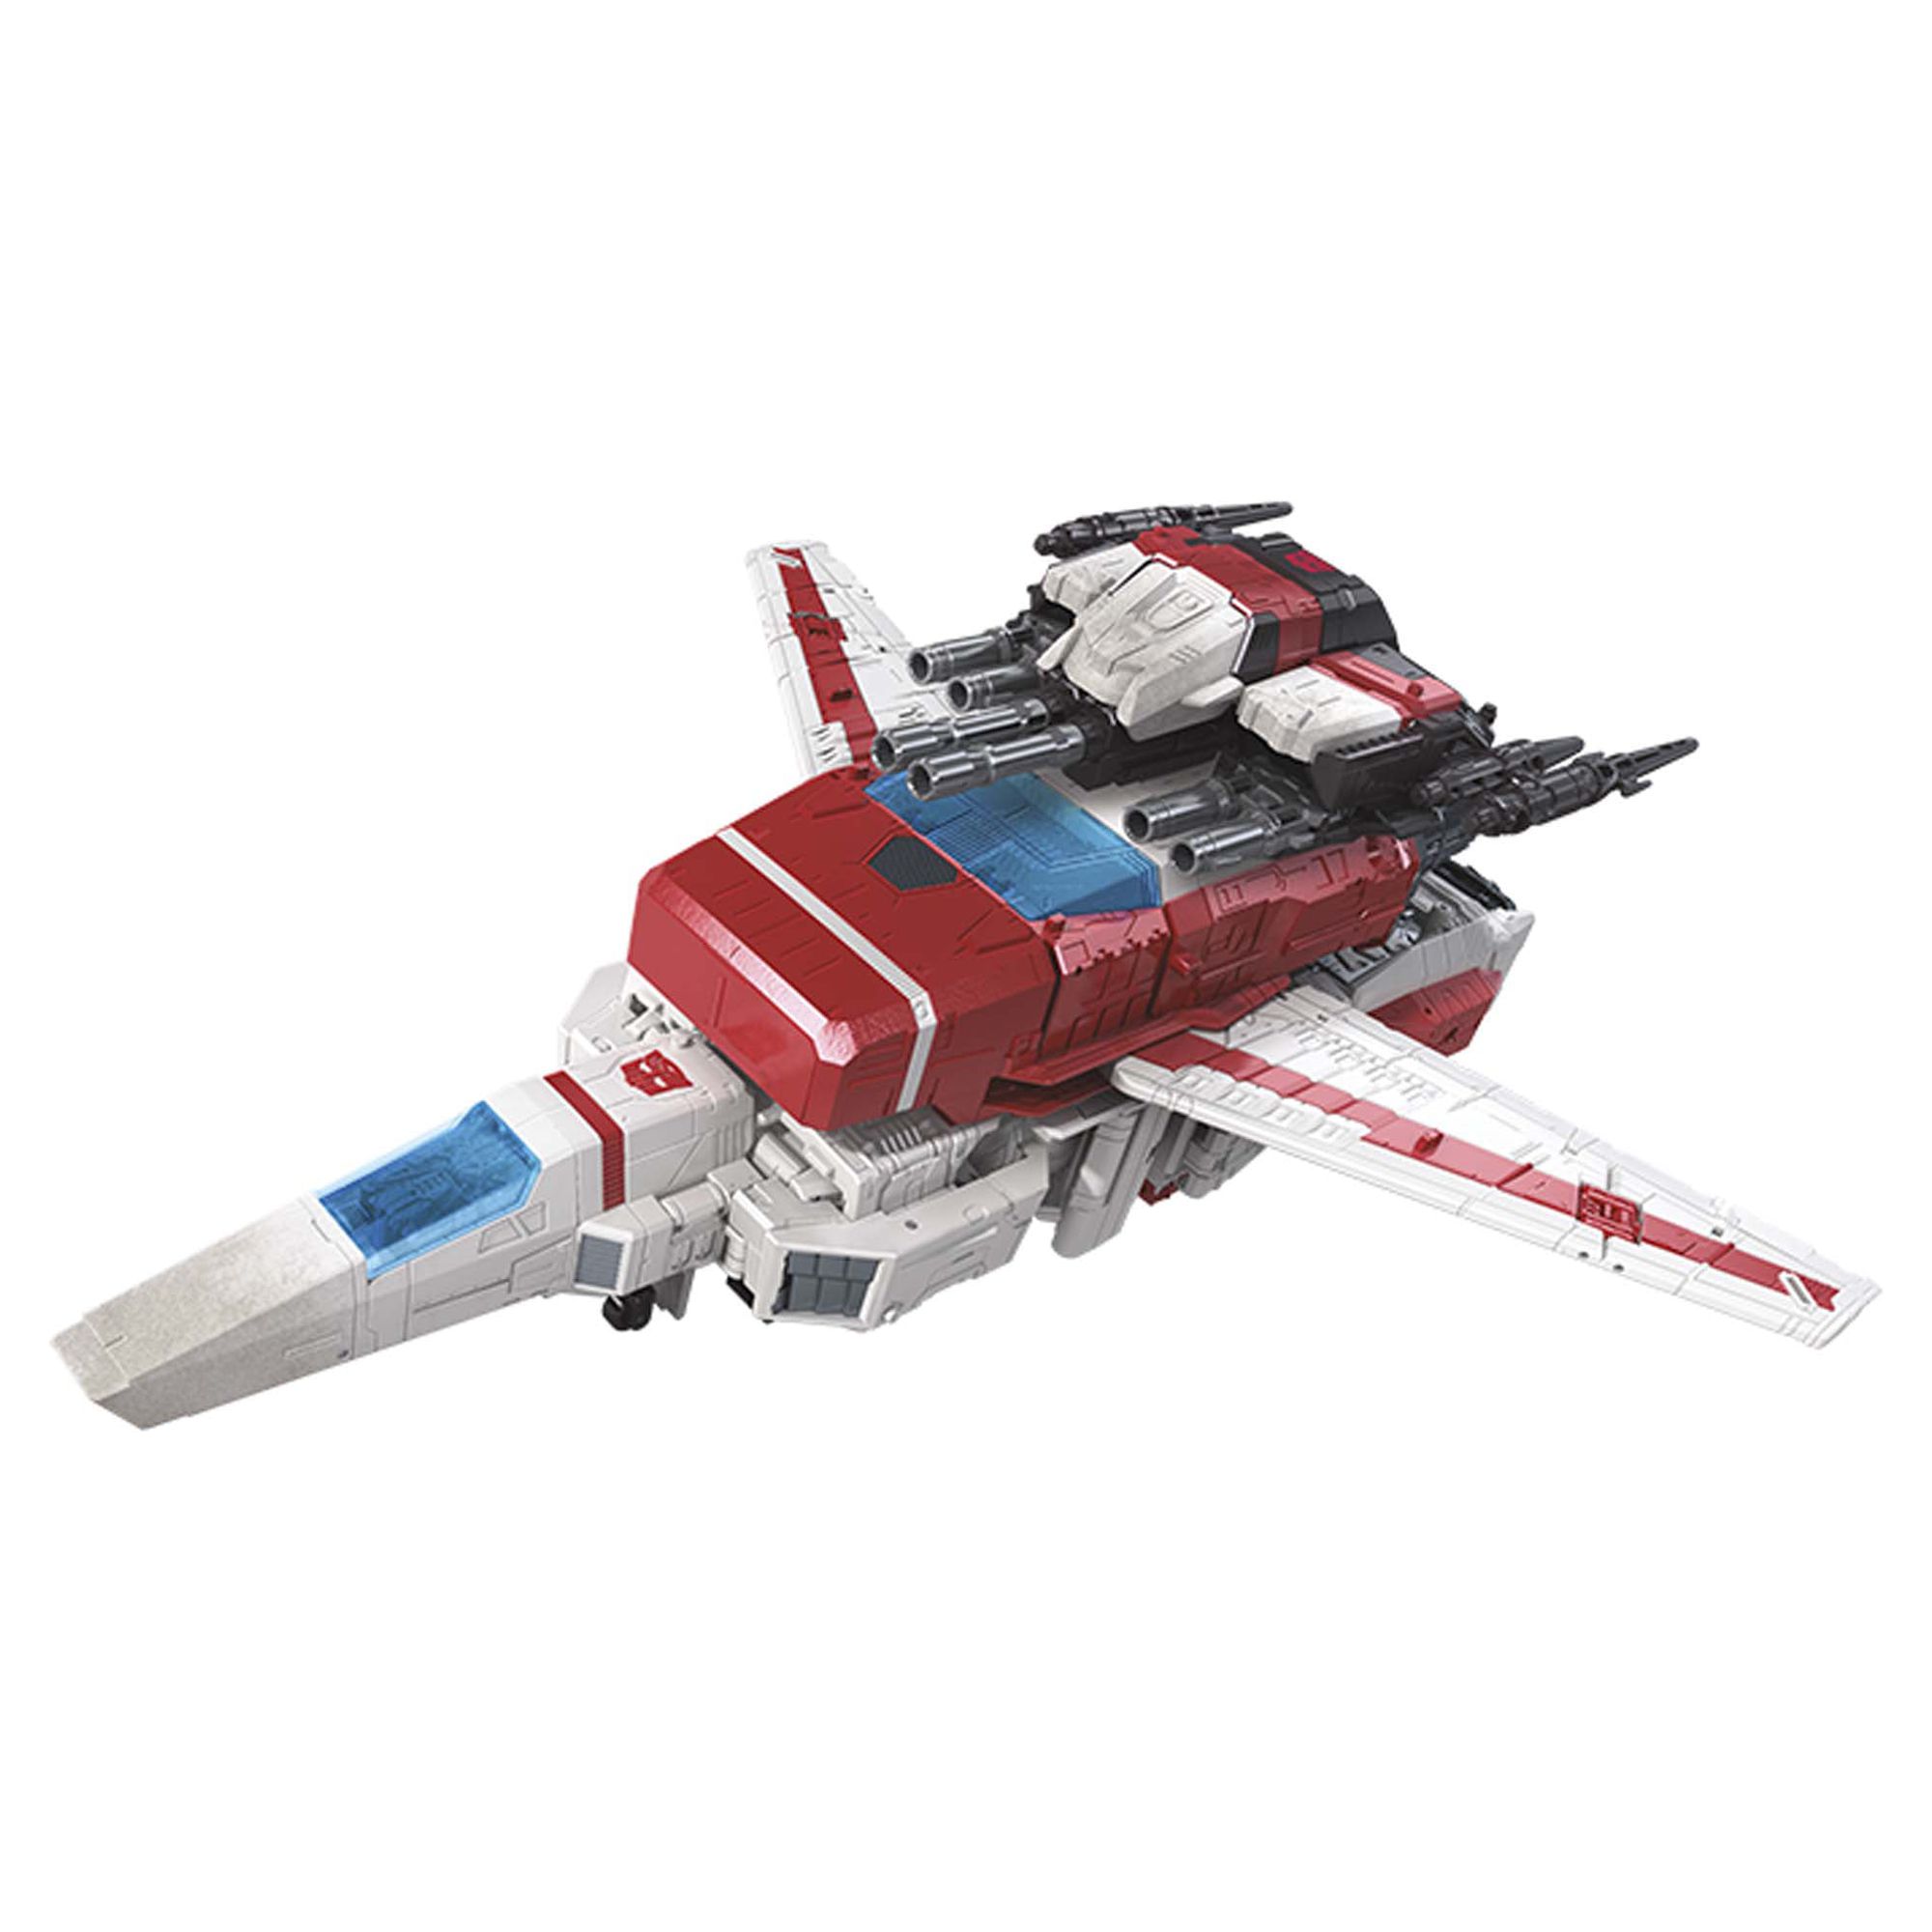 Transformers Generations War for Cybertron Commander WFC-S28 Jetfire Figure - image 3 of 13